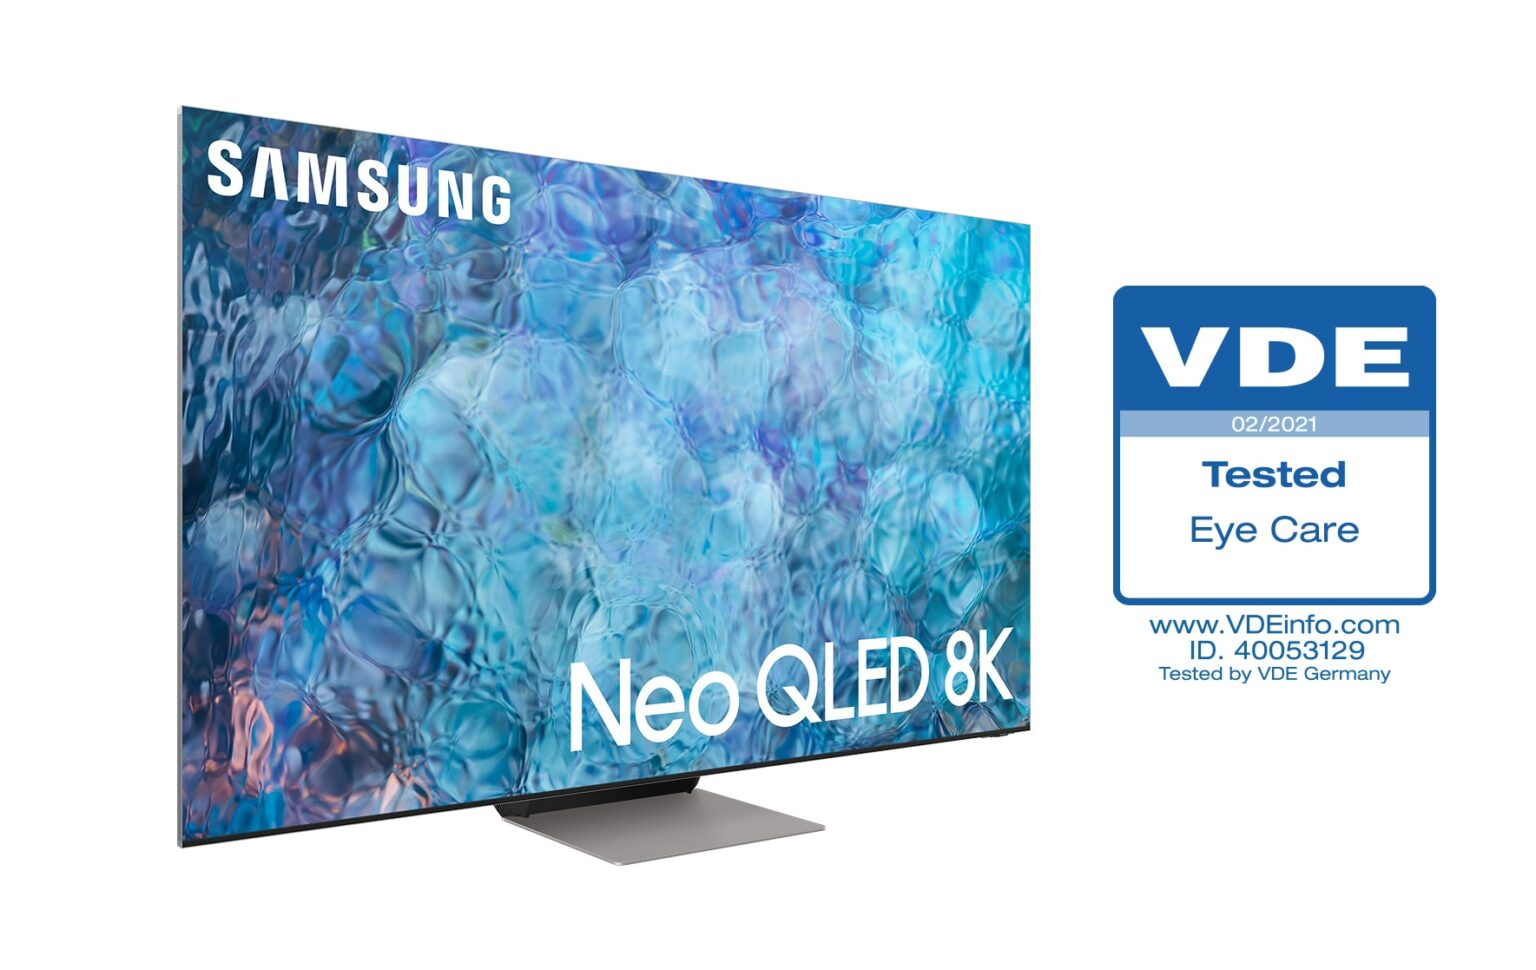 Samsung’s 2021 Neo QLED TVs Receive Industry-First ‘Eye Care’ Certification